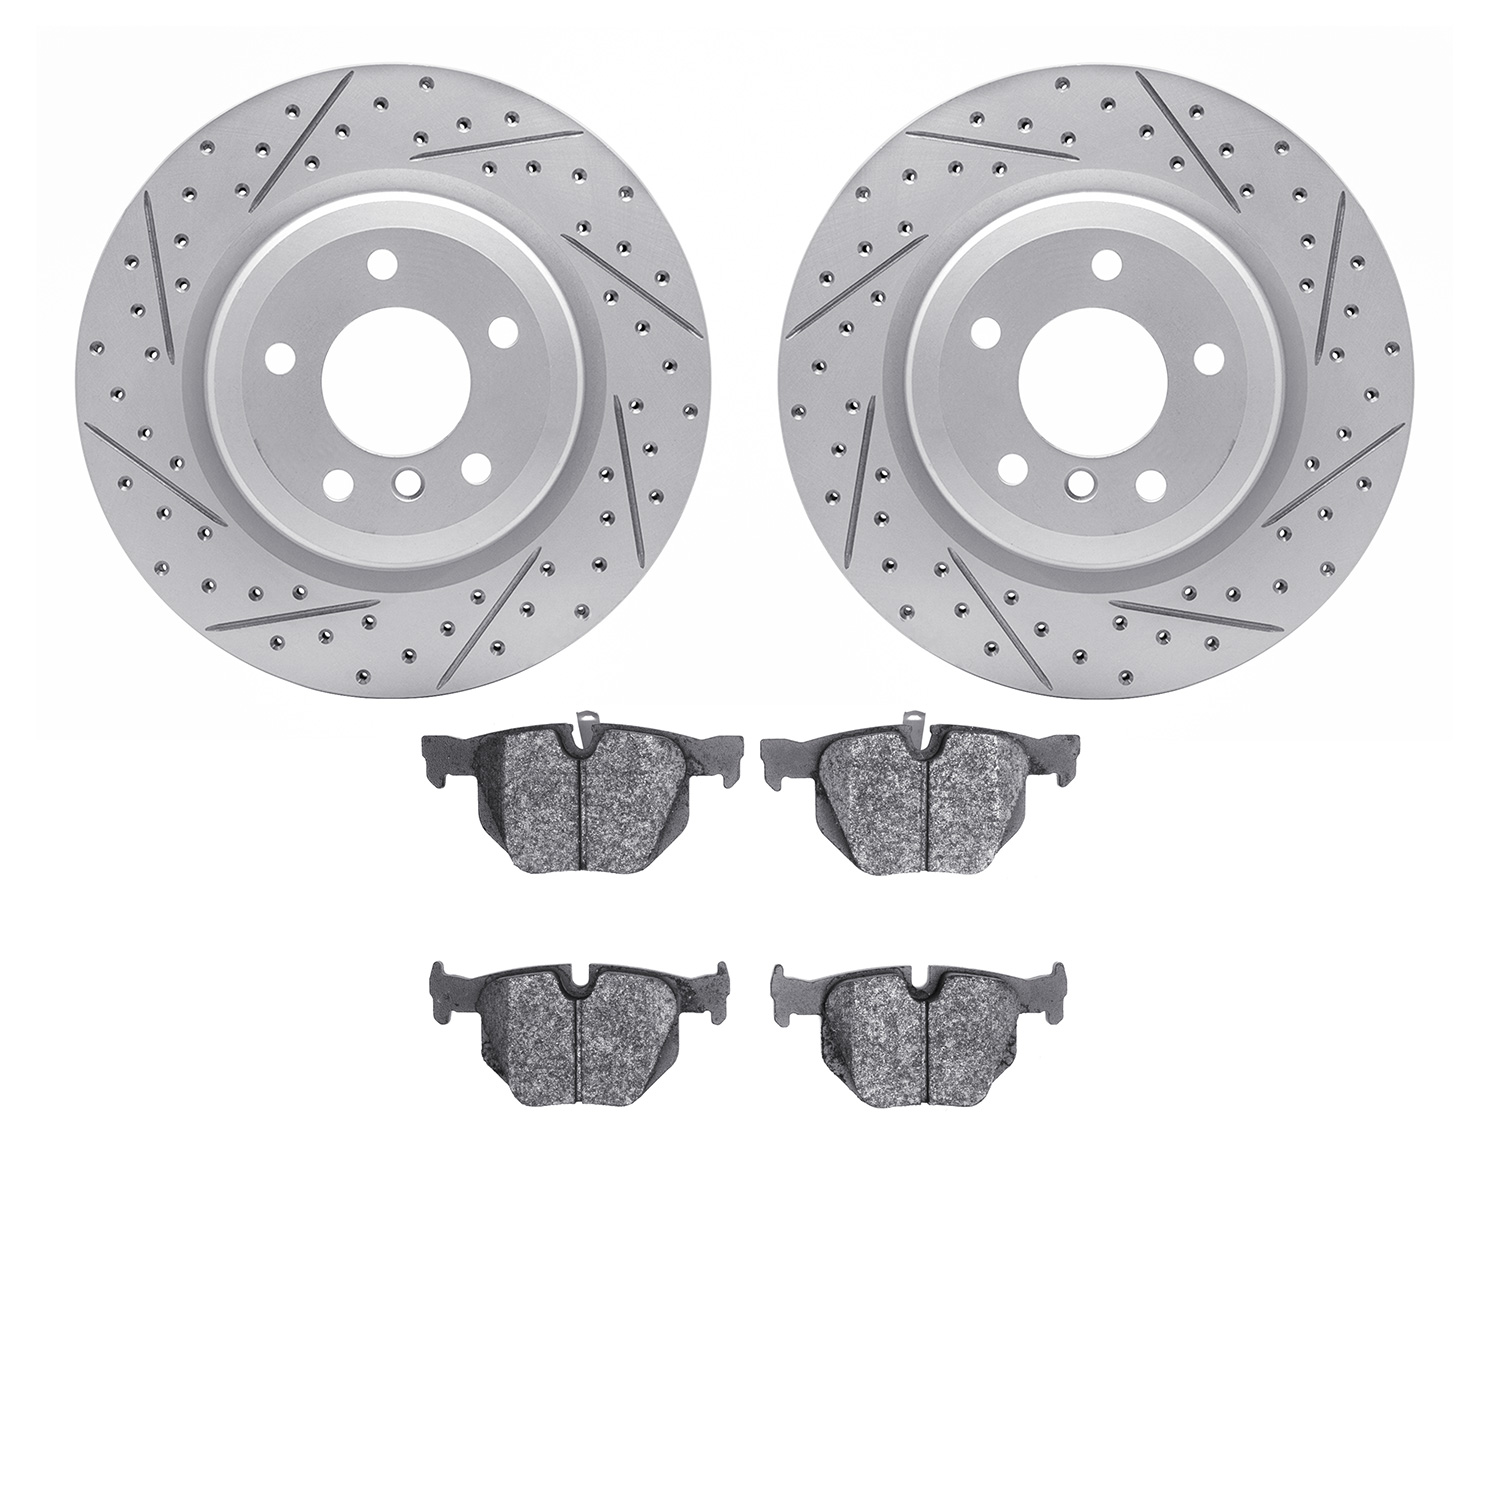 2502-31087 Geoperformance Drilled/Slotted Rotors w/5000 Advanced Brake Pads Kit, 2006-2015 BMW, Position: Rear